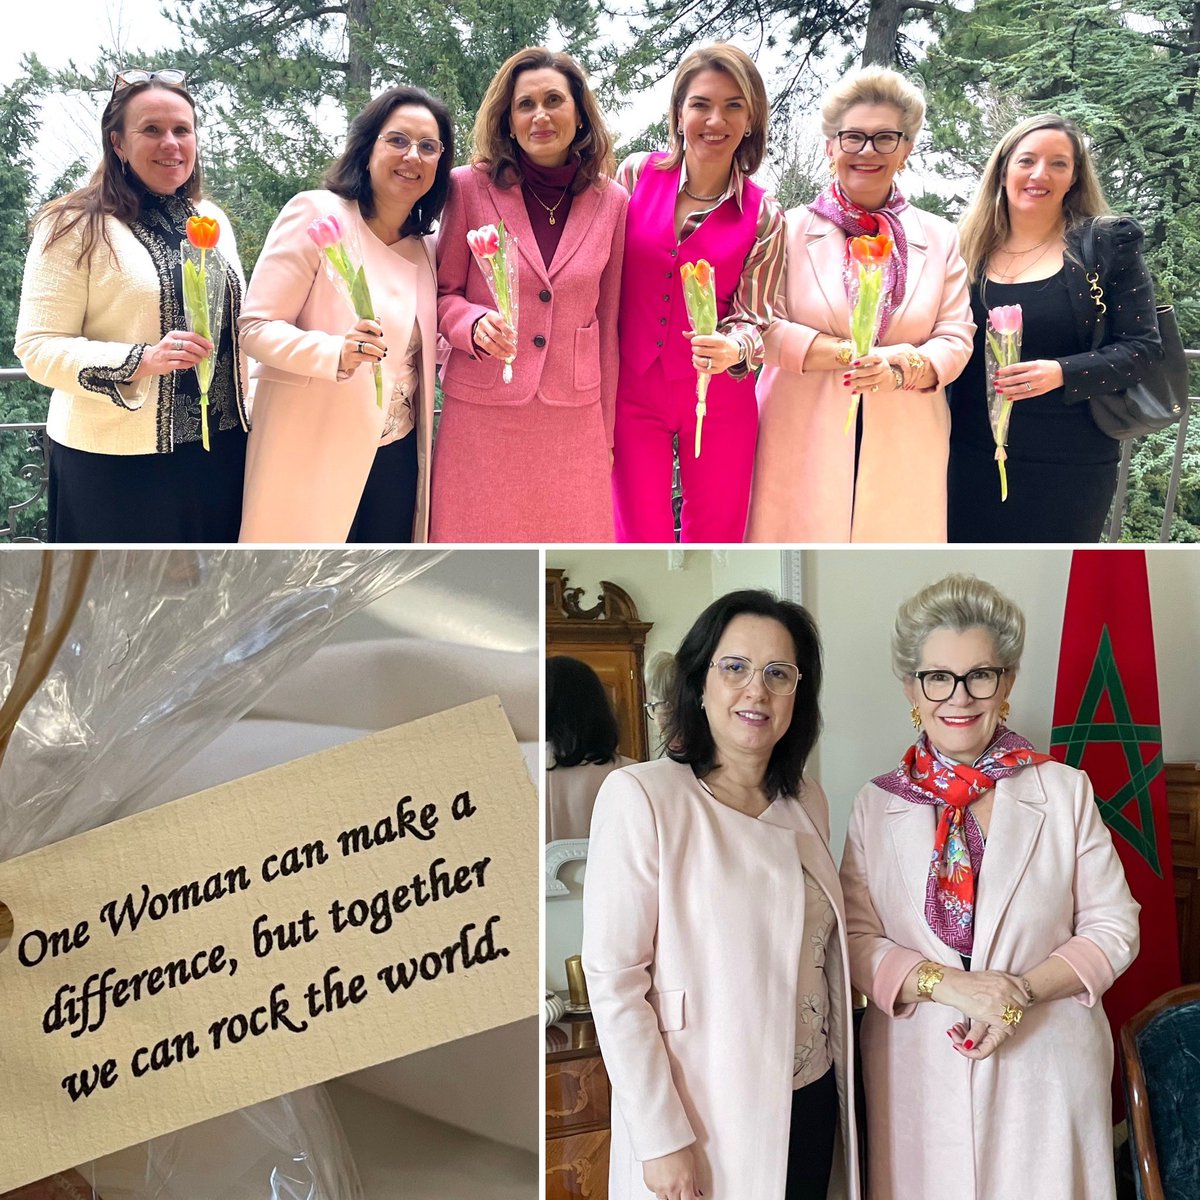 A wonderful women ambassadors’ lunch for International Women Day - hosted by the Ambassador of Morocco ! “One woman can make a difference but together we can rock the world! “ 🇫🇷 🇲🇦 🇱🇧🇹🇷🇭🇺🇦🇷 #women4diplomacy